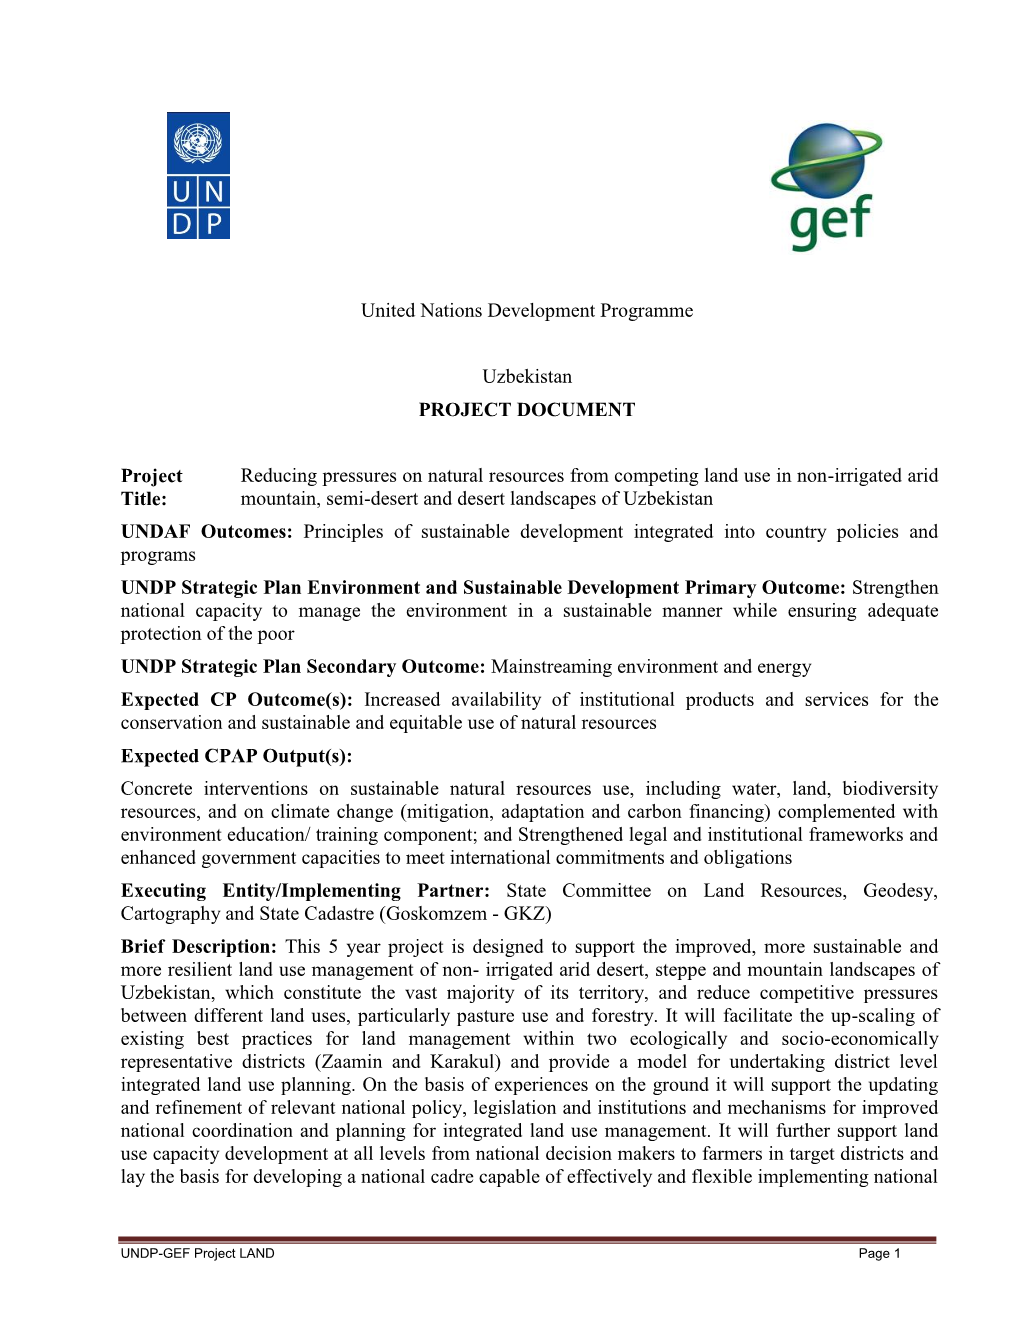 United Nations Development Programme Uzbekistan PROJECT DOCUMENT Project Title: Reducing Pressures on Natural Resources From